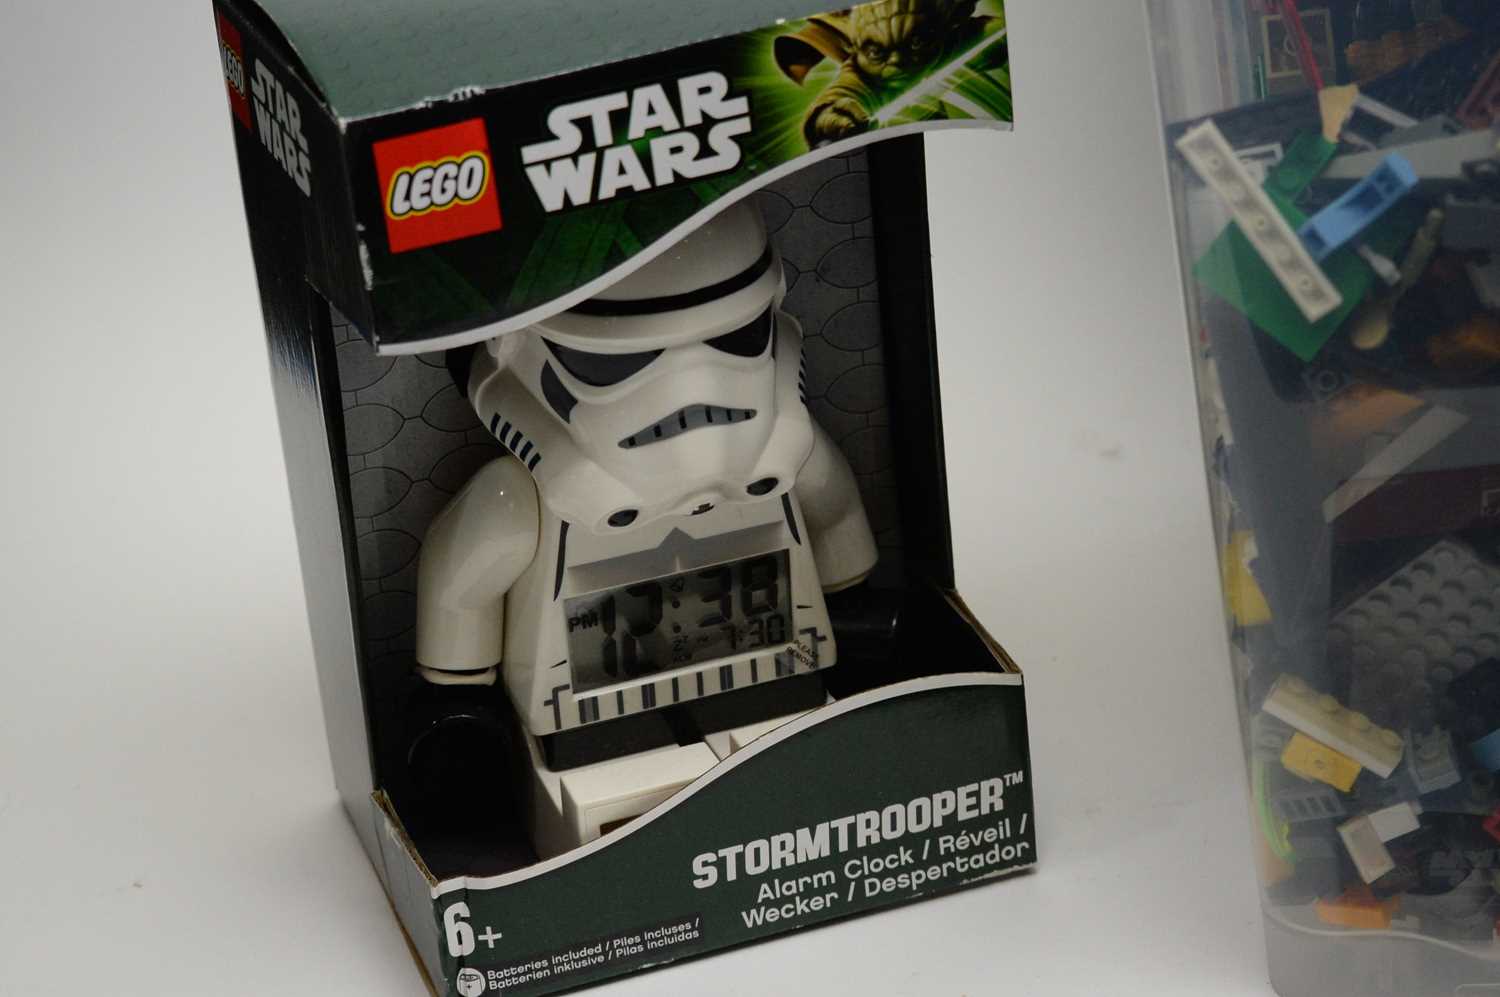 Star Wars LEGO sets and figures. - Image 5 of 5